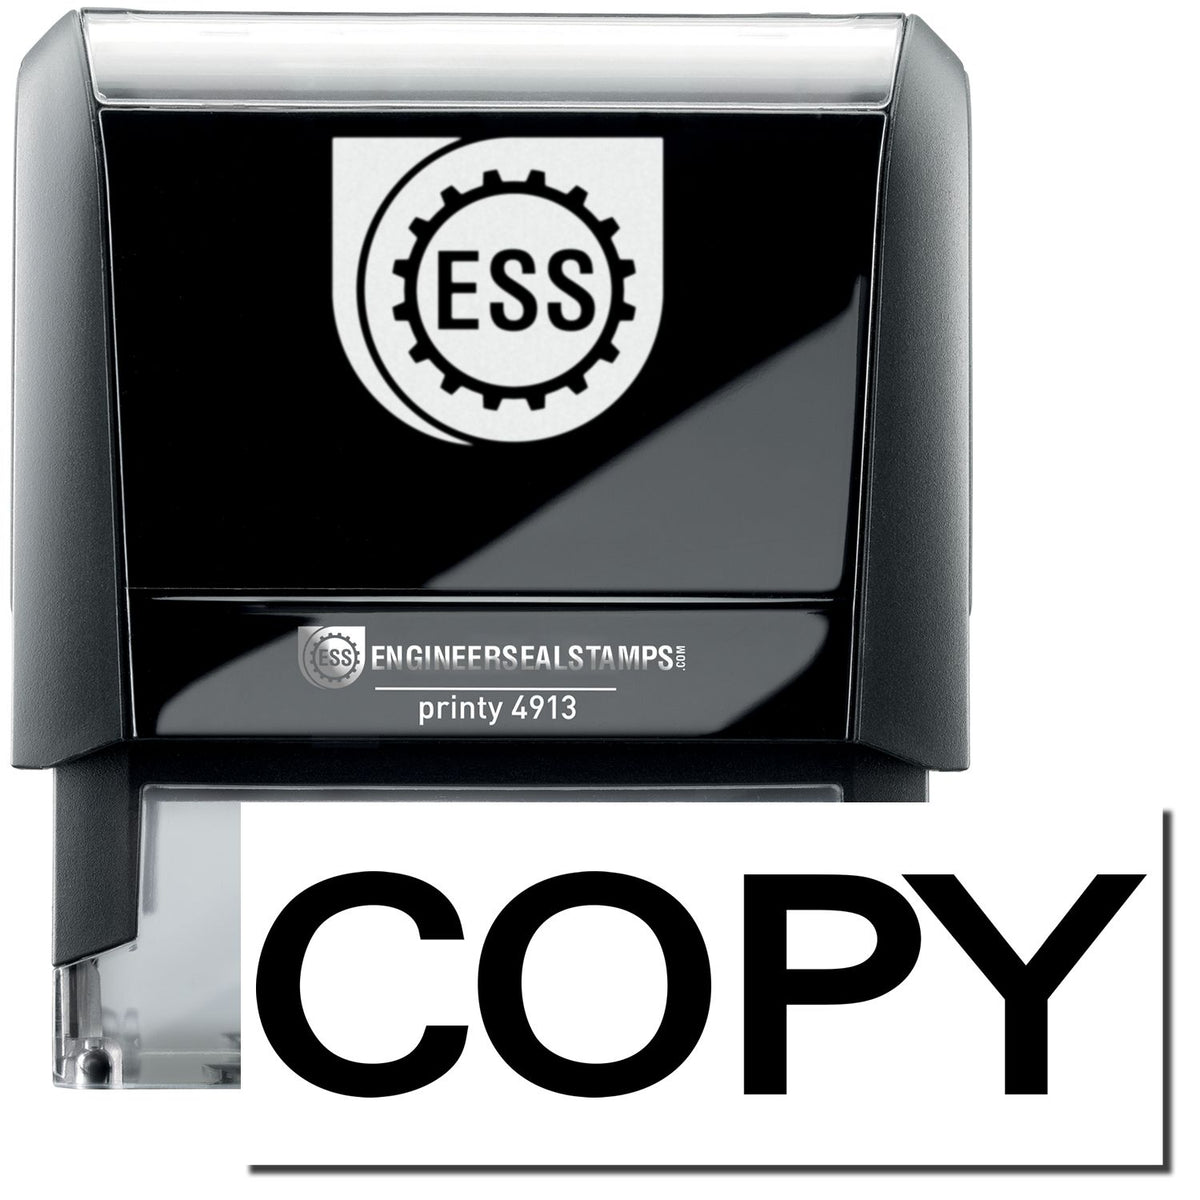 A self-inking stamp with a stamped image showing how the text &quot;COPY&quot; in a large bold font is displayed by it after stamping.